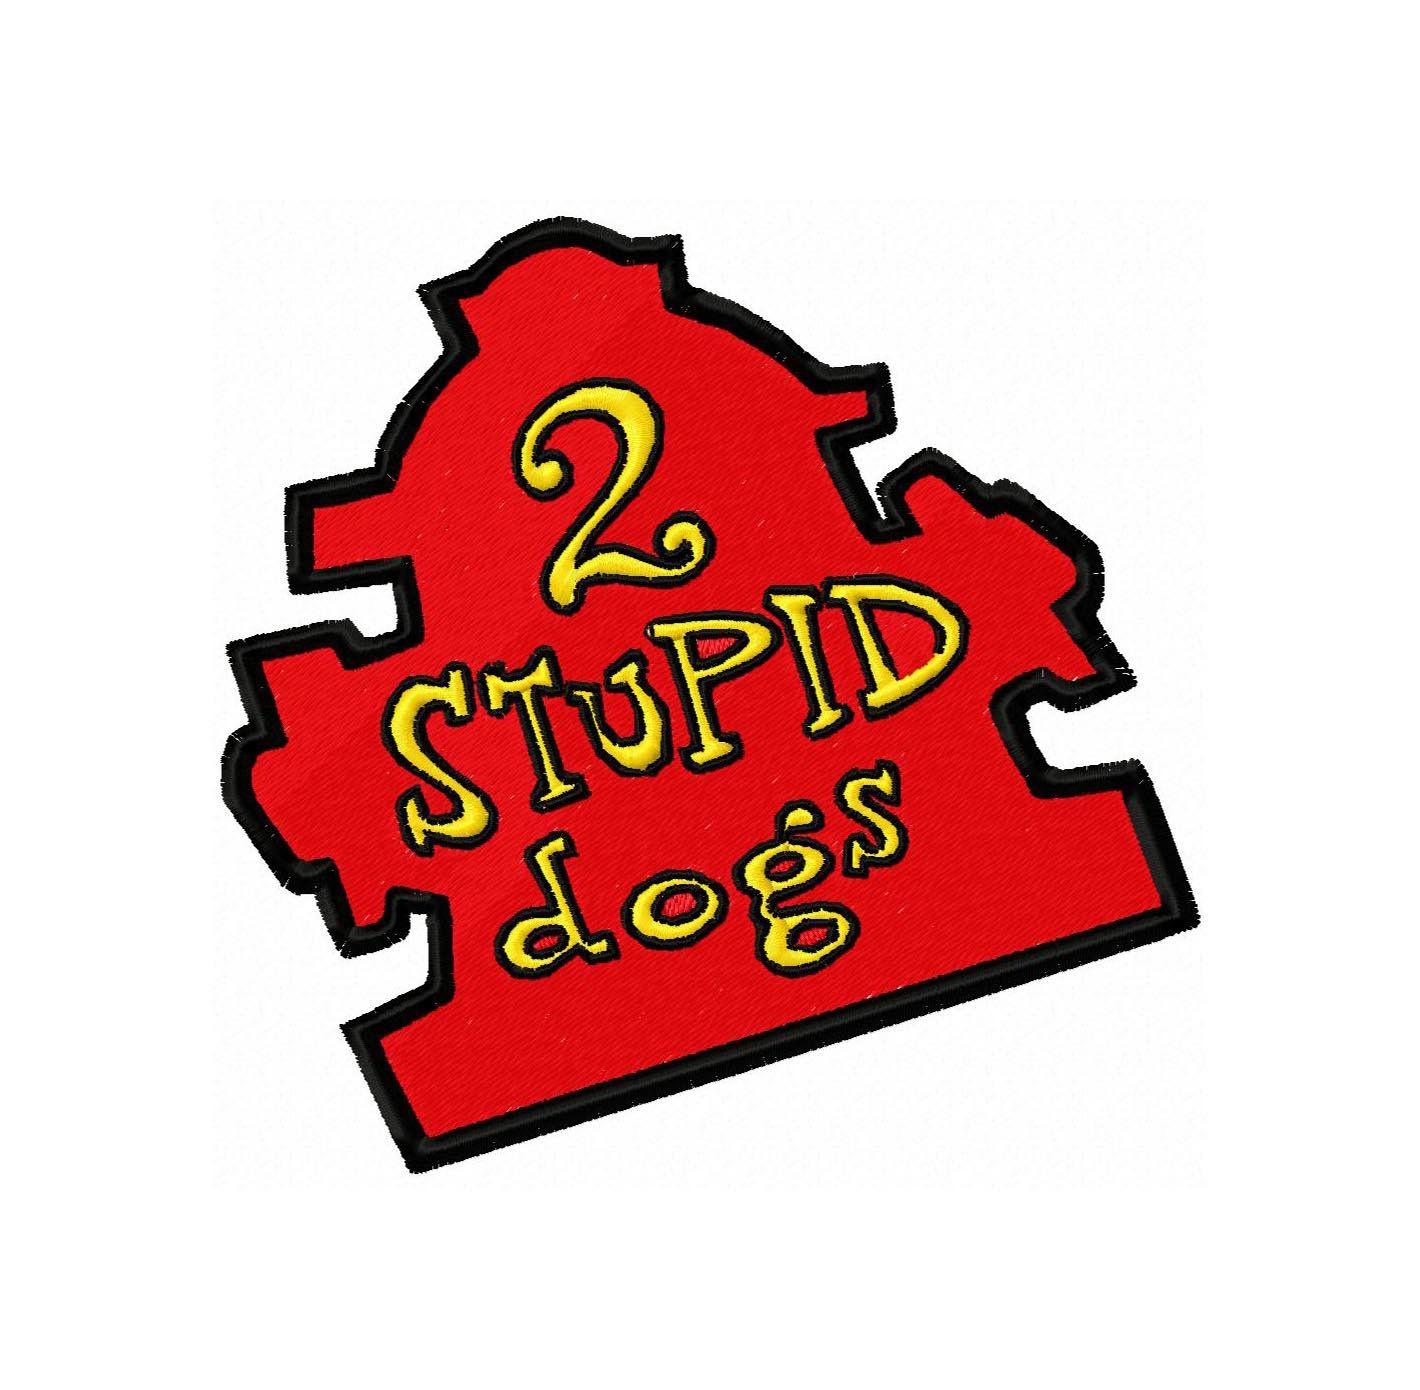 Stupid Logo - Stupid Dogs Logo Embroidery Design Instant Download